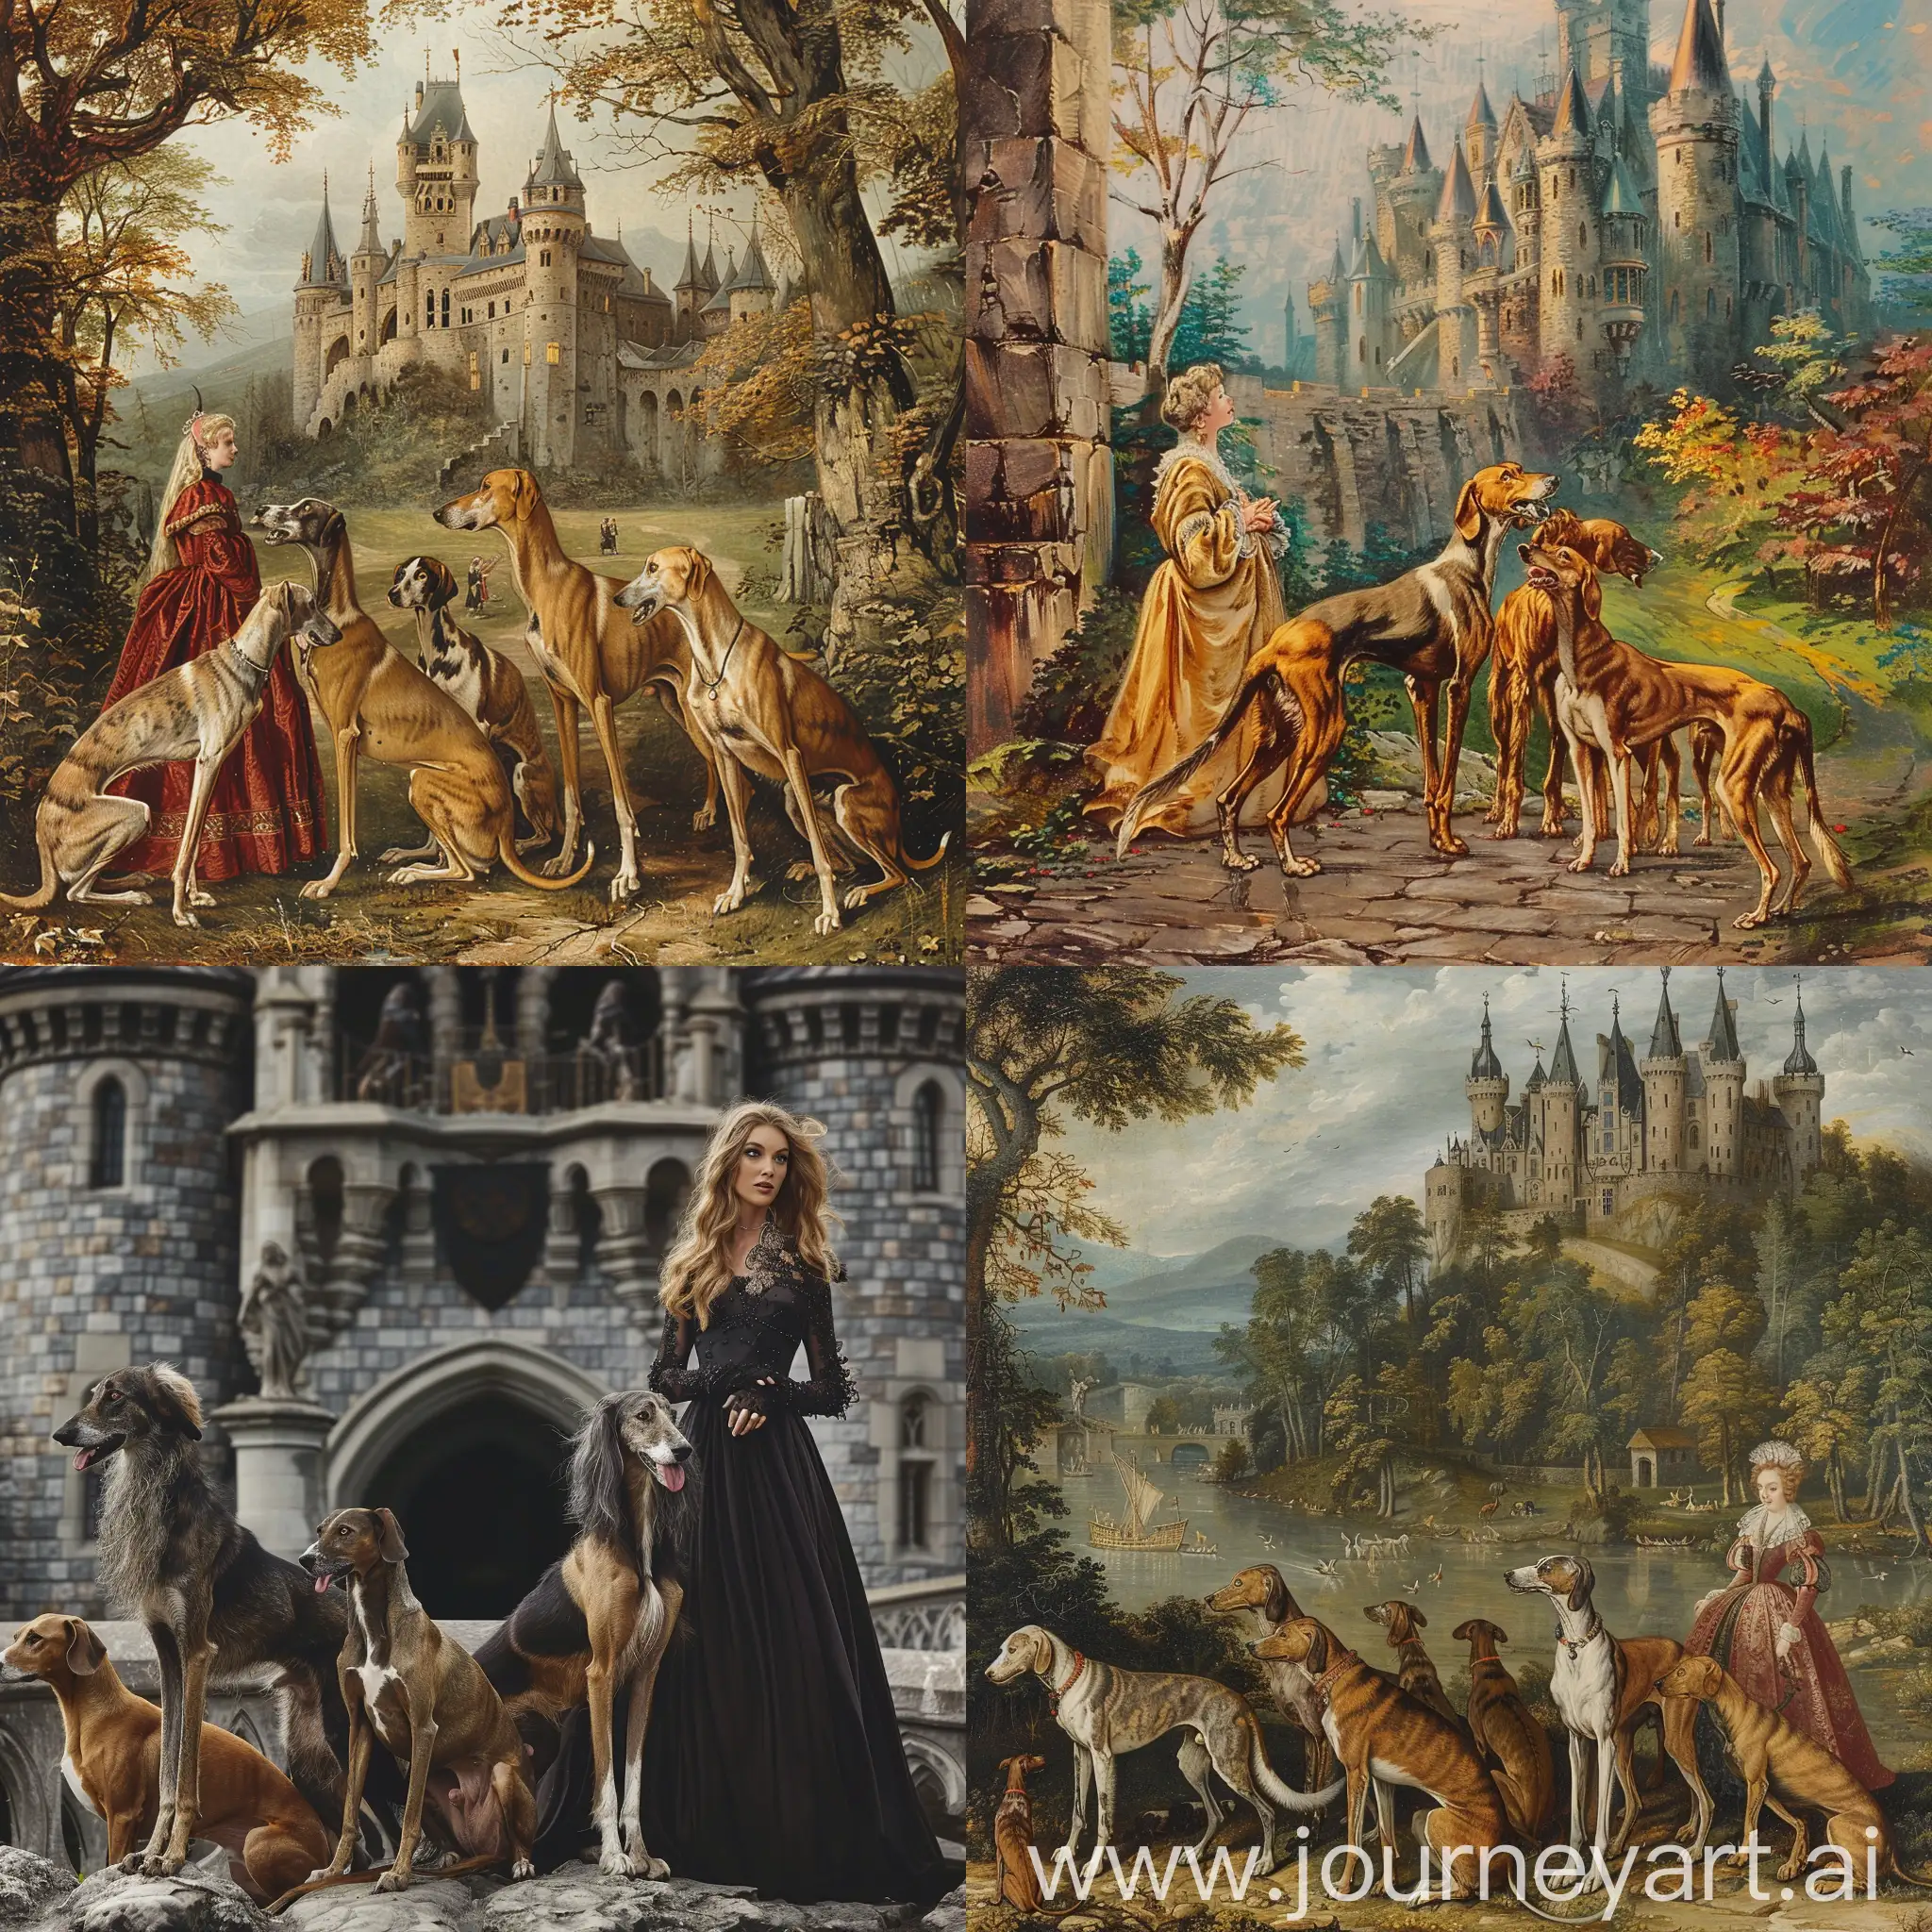 Greyhound, deerhound, Irish wolfhound, whippet and a lady in front of a castle